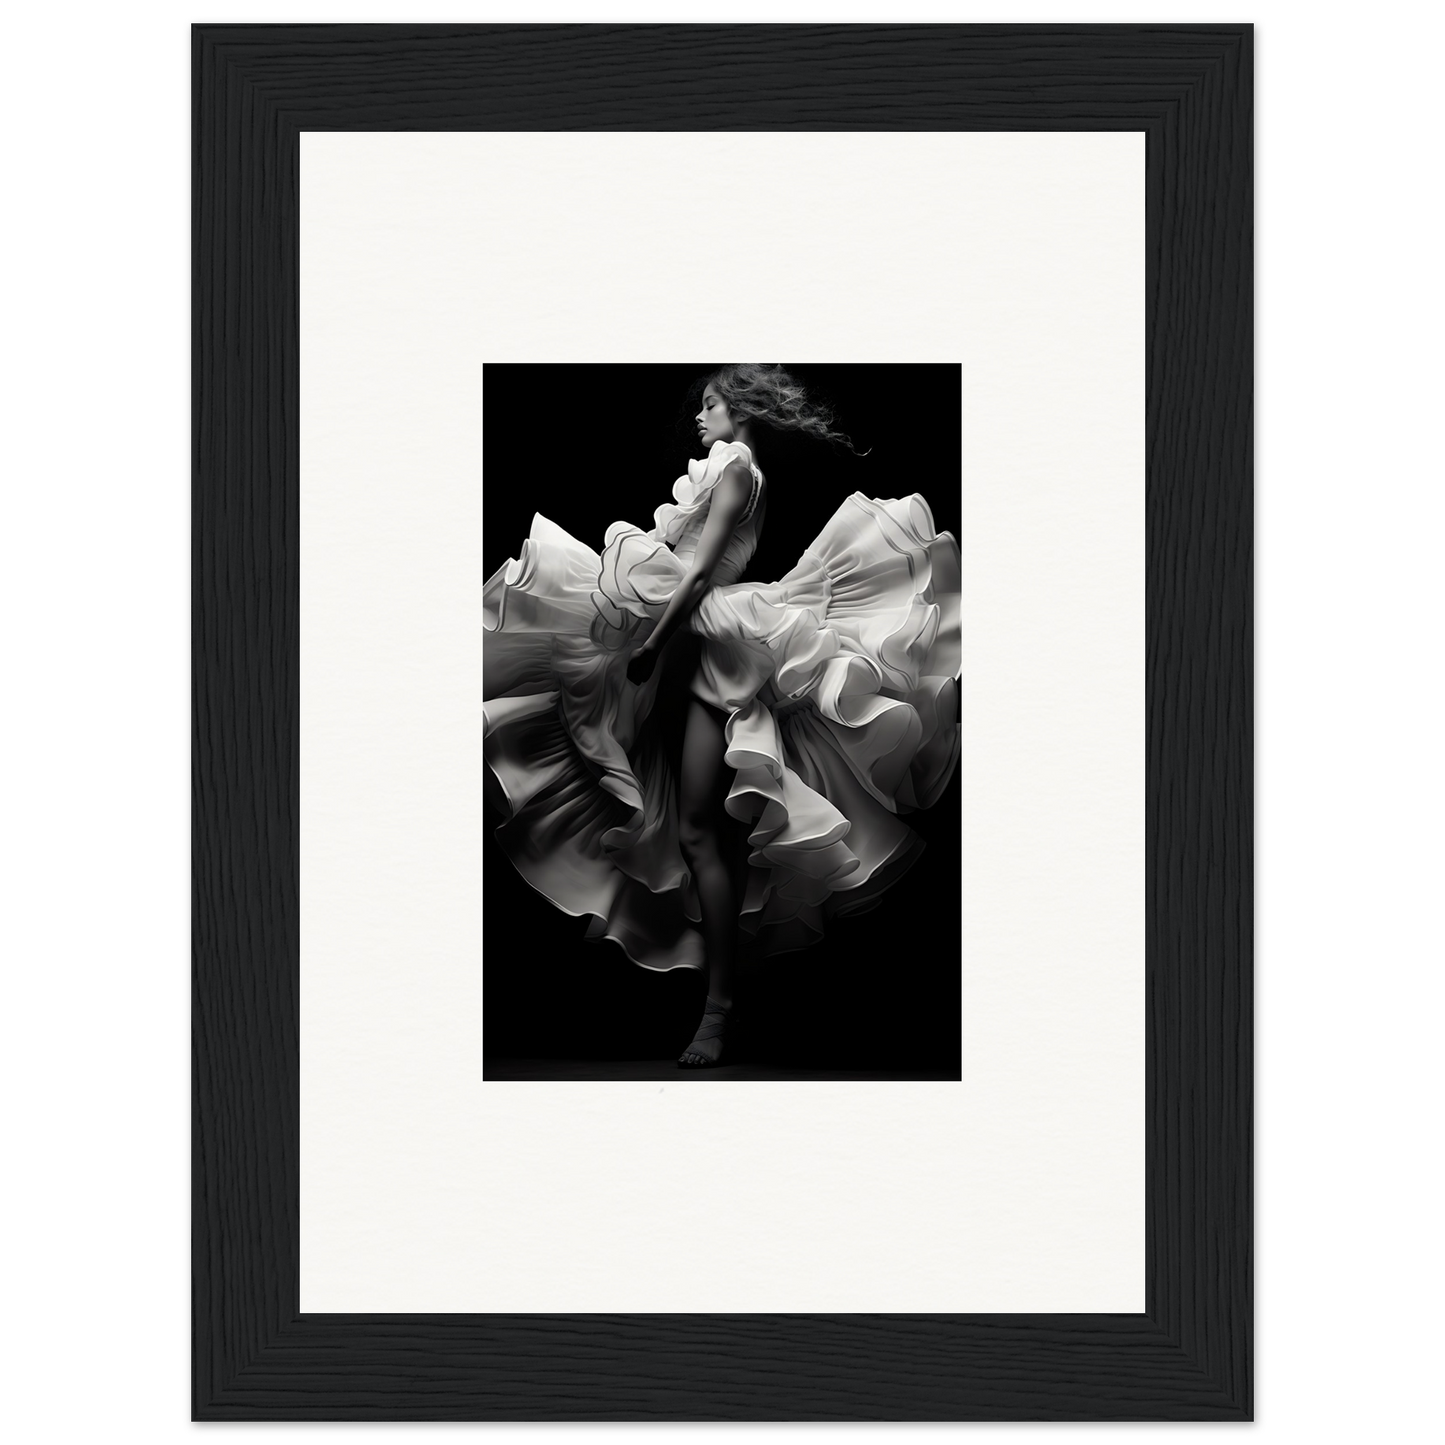 Dancers and time 05p - framed poster - 13x18 cm / 5x7″ /